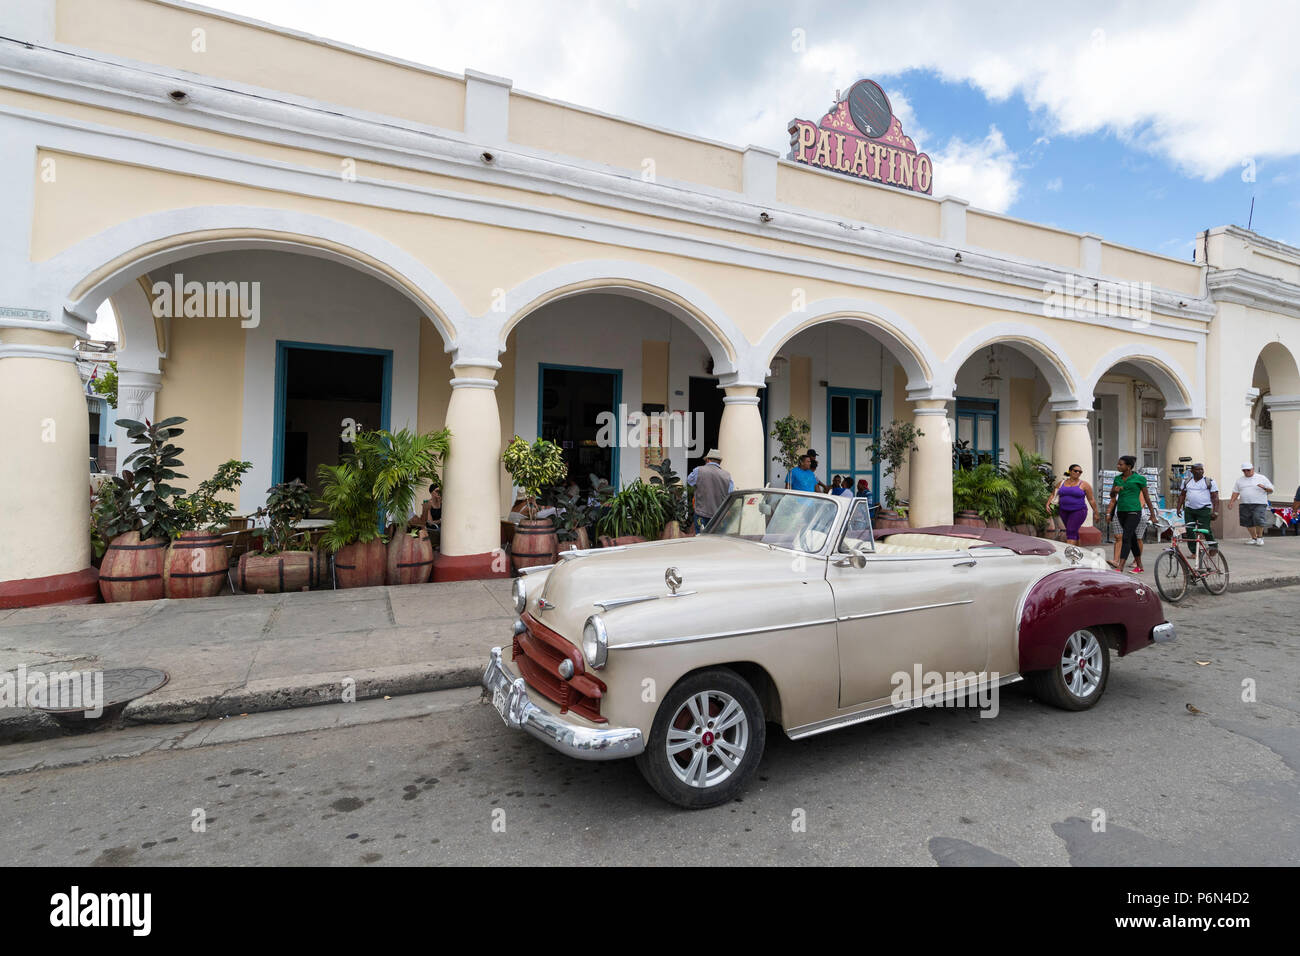 Classic Chevrolet Bel Air taxi with custom 'Che' paint job in the town of Cienfuegos, Cuba. Stock Photo